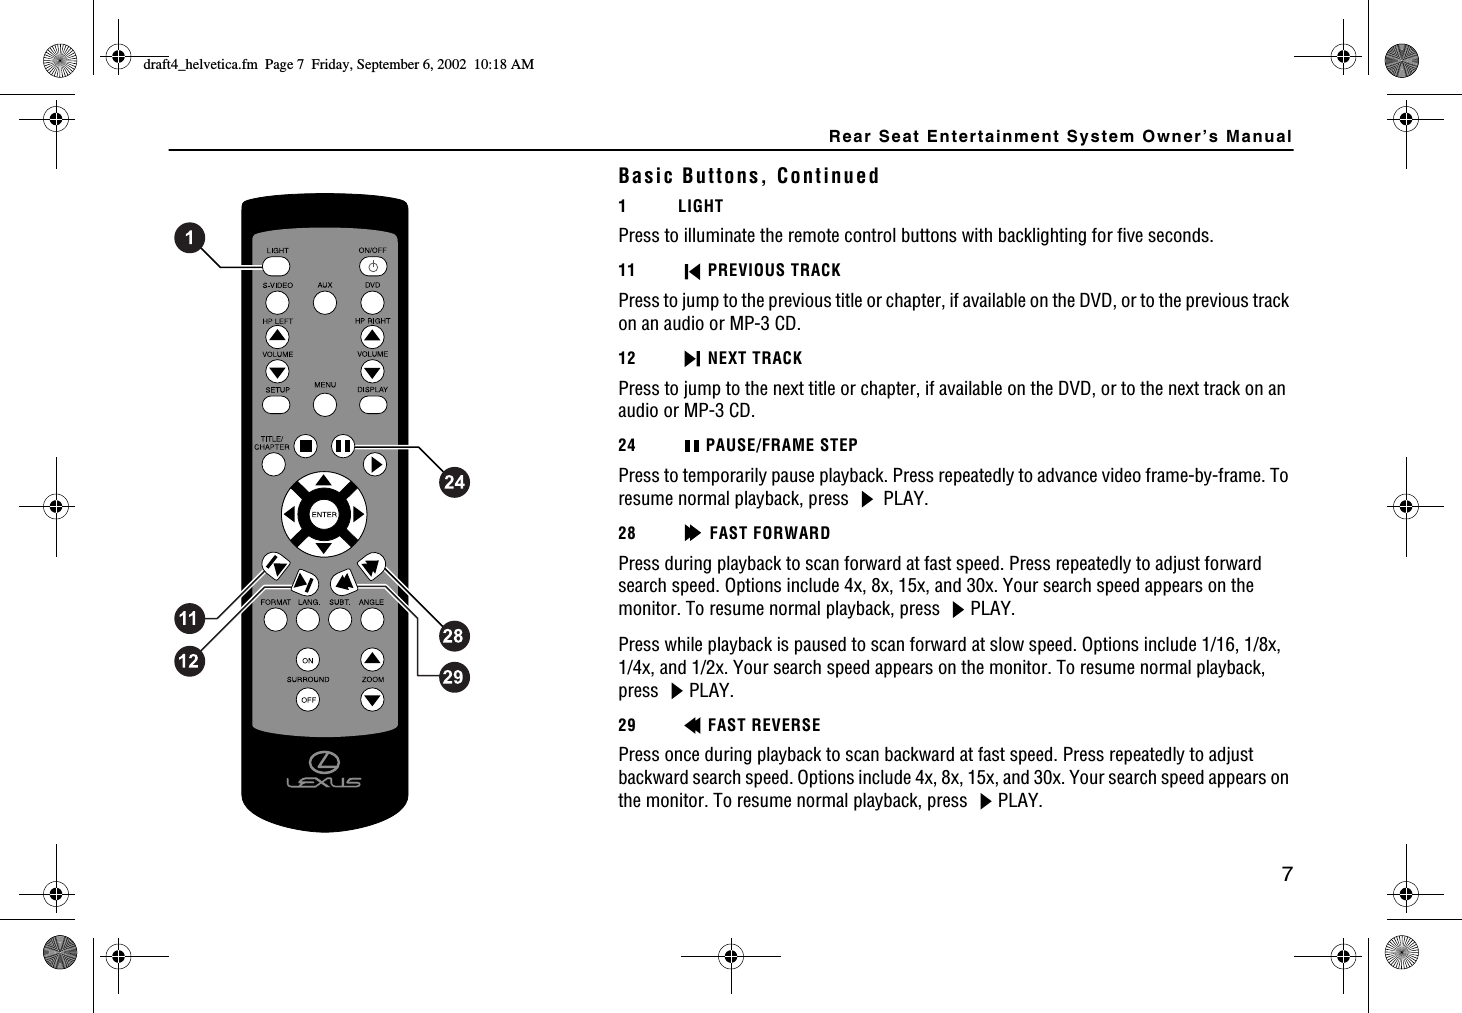 Rear Seat Entertainment System Owner’s Manual7Basic Buttons, Continued1 LIGHTPress to illuminate the remote control buttons with backlighting for five seconds.11 PREVIOUS TRACKPress to jump to the previous title or chapter, if available on the DVD, or to the previous track on an audio or MP-3 CD. 12 NEXT TRACKPress to jump to the next title or chapter, if available on the DVD, or to the next track on an audio or MP-3 CD. 24 PAUSE/FRAME STEPPress to temporarily pause playback. Press repeatedly to advance video frame-by-frame. To resume normal playback, press   PLAY.28 FAST FORWARDPress during playback to scan forward at fast speed. Press repeatedly to adjust forward search speed. Options include 4x, 8x, 15x, and 30x. Your search speed appears on the monitor. To resume normal playback, press  PLAY.Press while playback is paused to scan forward at slow speed. Options include 1/16, 1/8x, 1/4x, and 1/2x. Your search speed appears on the monitor. To resume normal playback, press PLAY.29 FAST REVERSEPress once during playback to scan backward at fast speed. Press repeatedly to adjust backward search speed. Options include 4x, 8x, 15x, and 30x. Your search speed appears on the monitor. To resume normal playback, press  PLAY.FTCHVAJGNXGVKECHO2CIG(TKFC[5GRVGODGT#/